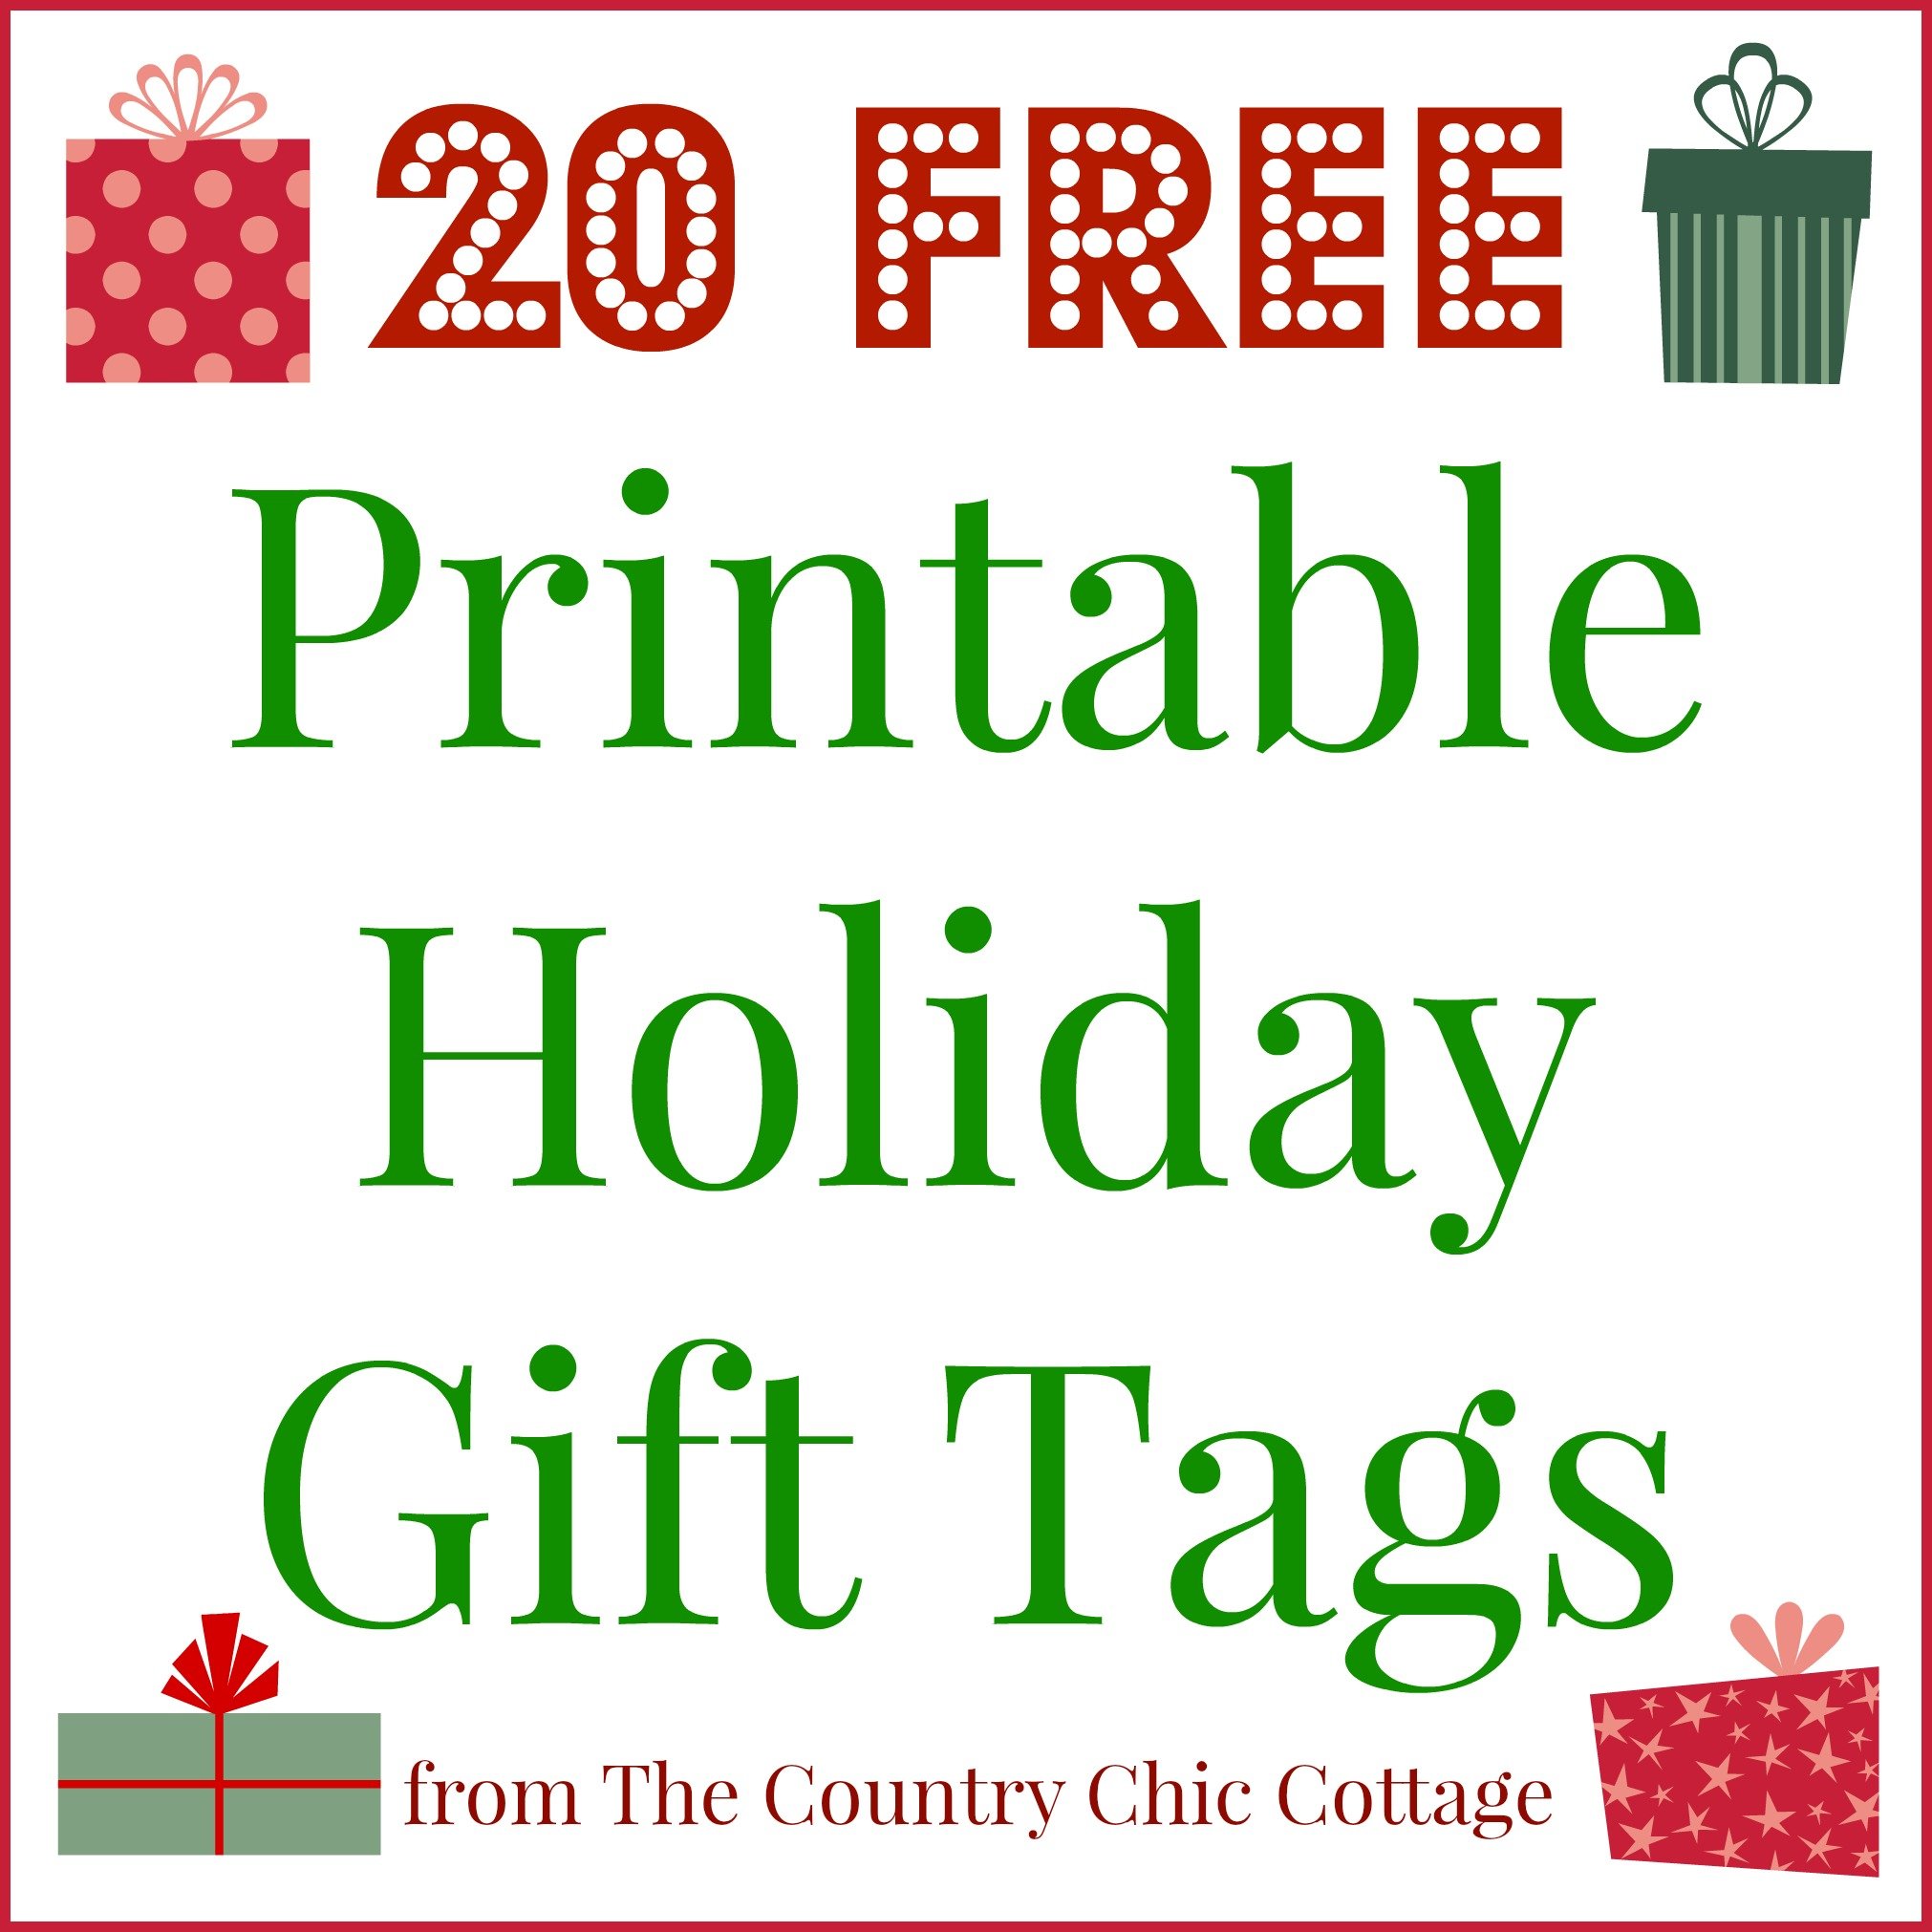 https://www.thecountrychiccottage.net/wp-content/uploads/2014/12/free-printable-holiday-gift-tags.jpg